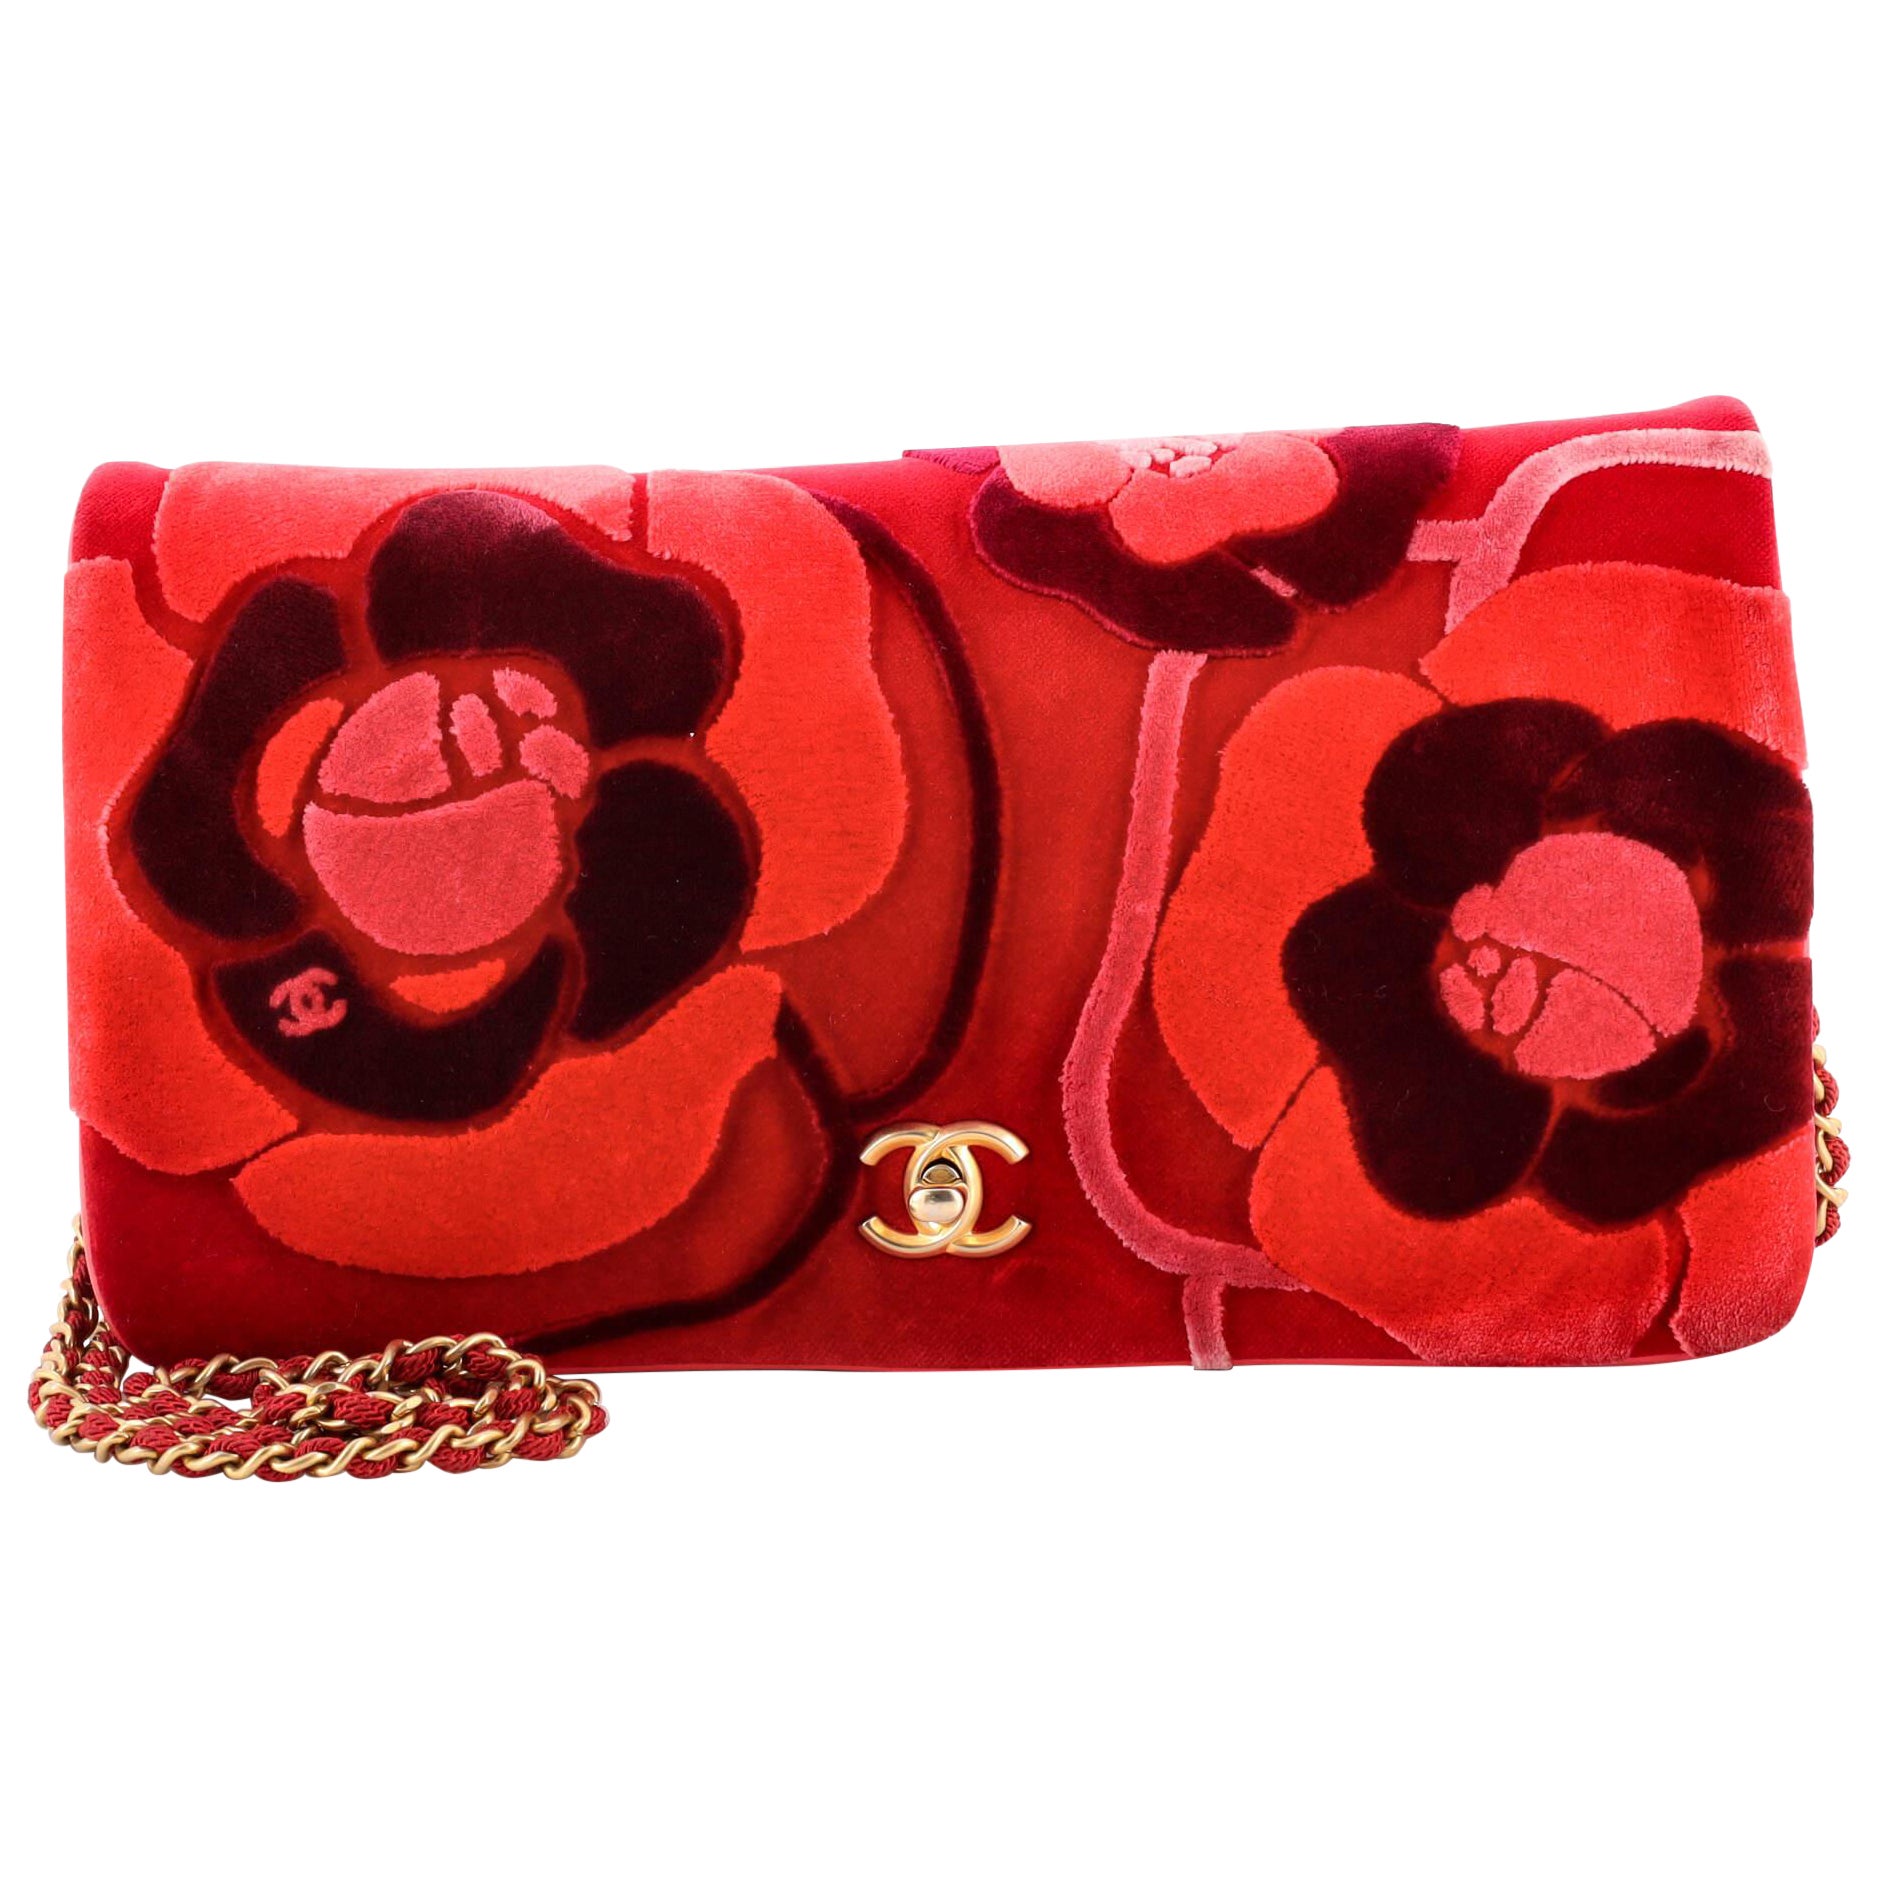 Camellia Chanel Purse - 96 For Sale on 1stDibs